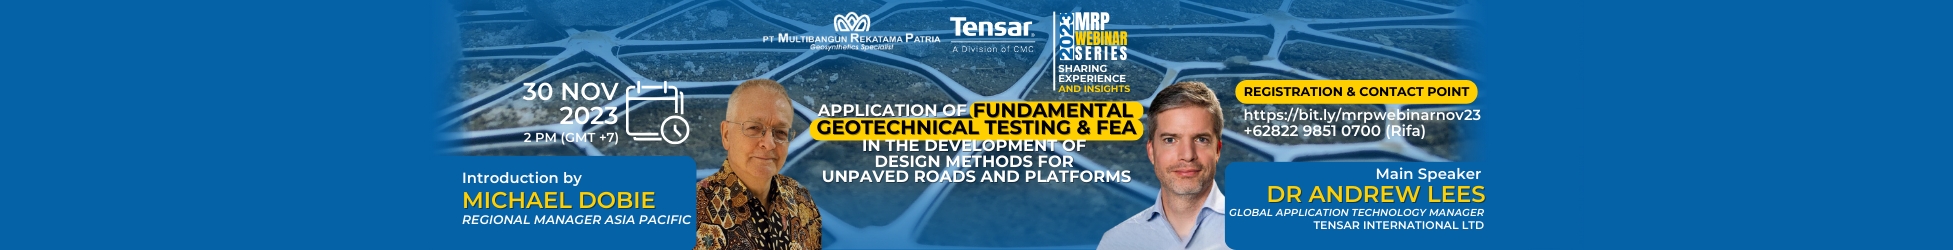 Image of (Webinar) Application of Fundamental Geotechnical Testing and FEA in the Development of Design Methods for Unpaved Roads and Platforms 2023 with MRP, Indonesia